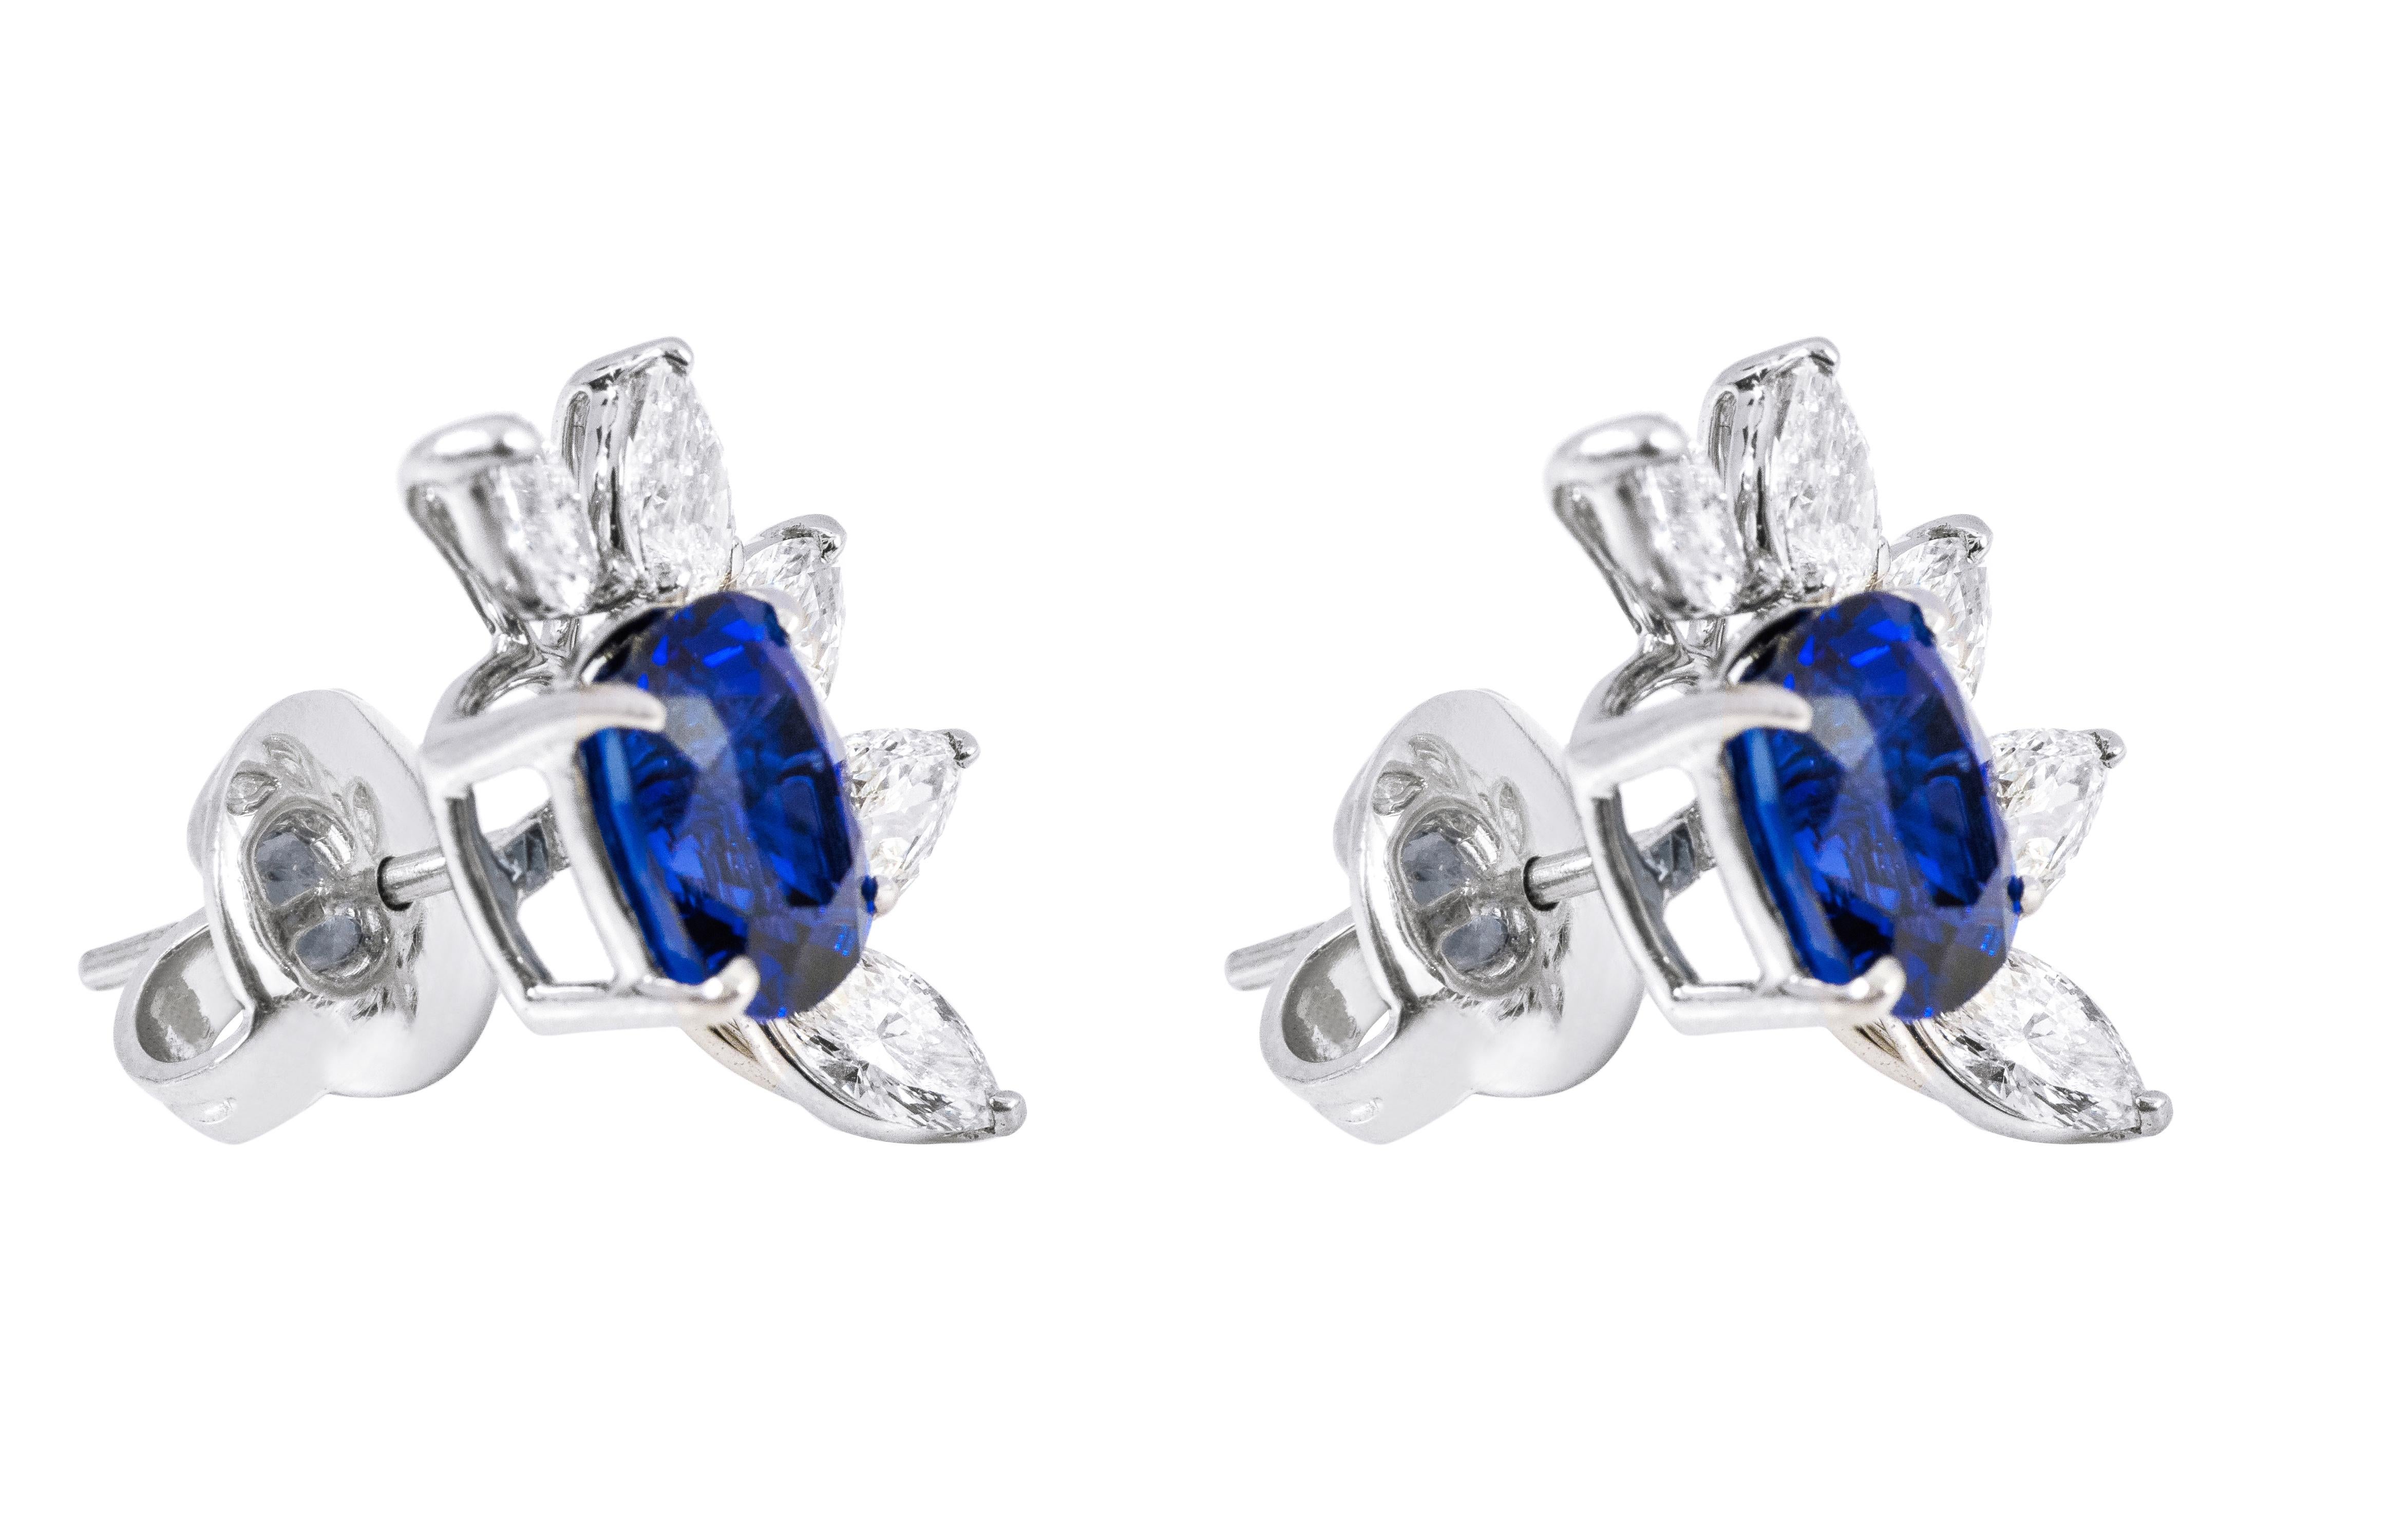 Cushion Cut Platinum GIA Certified 10.54 Carats Sapphire and Diamond Cocktail Stud Earrings